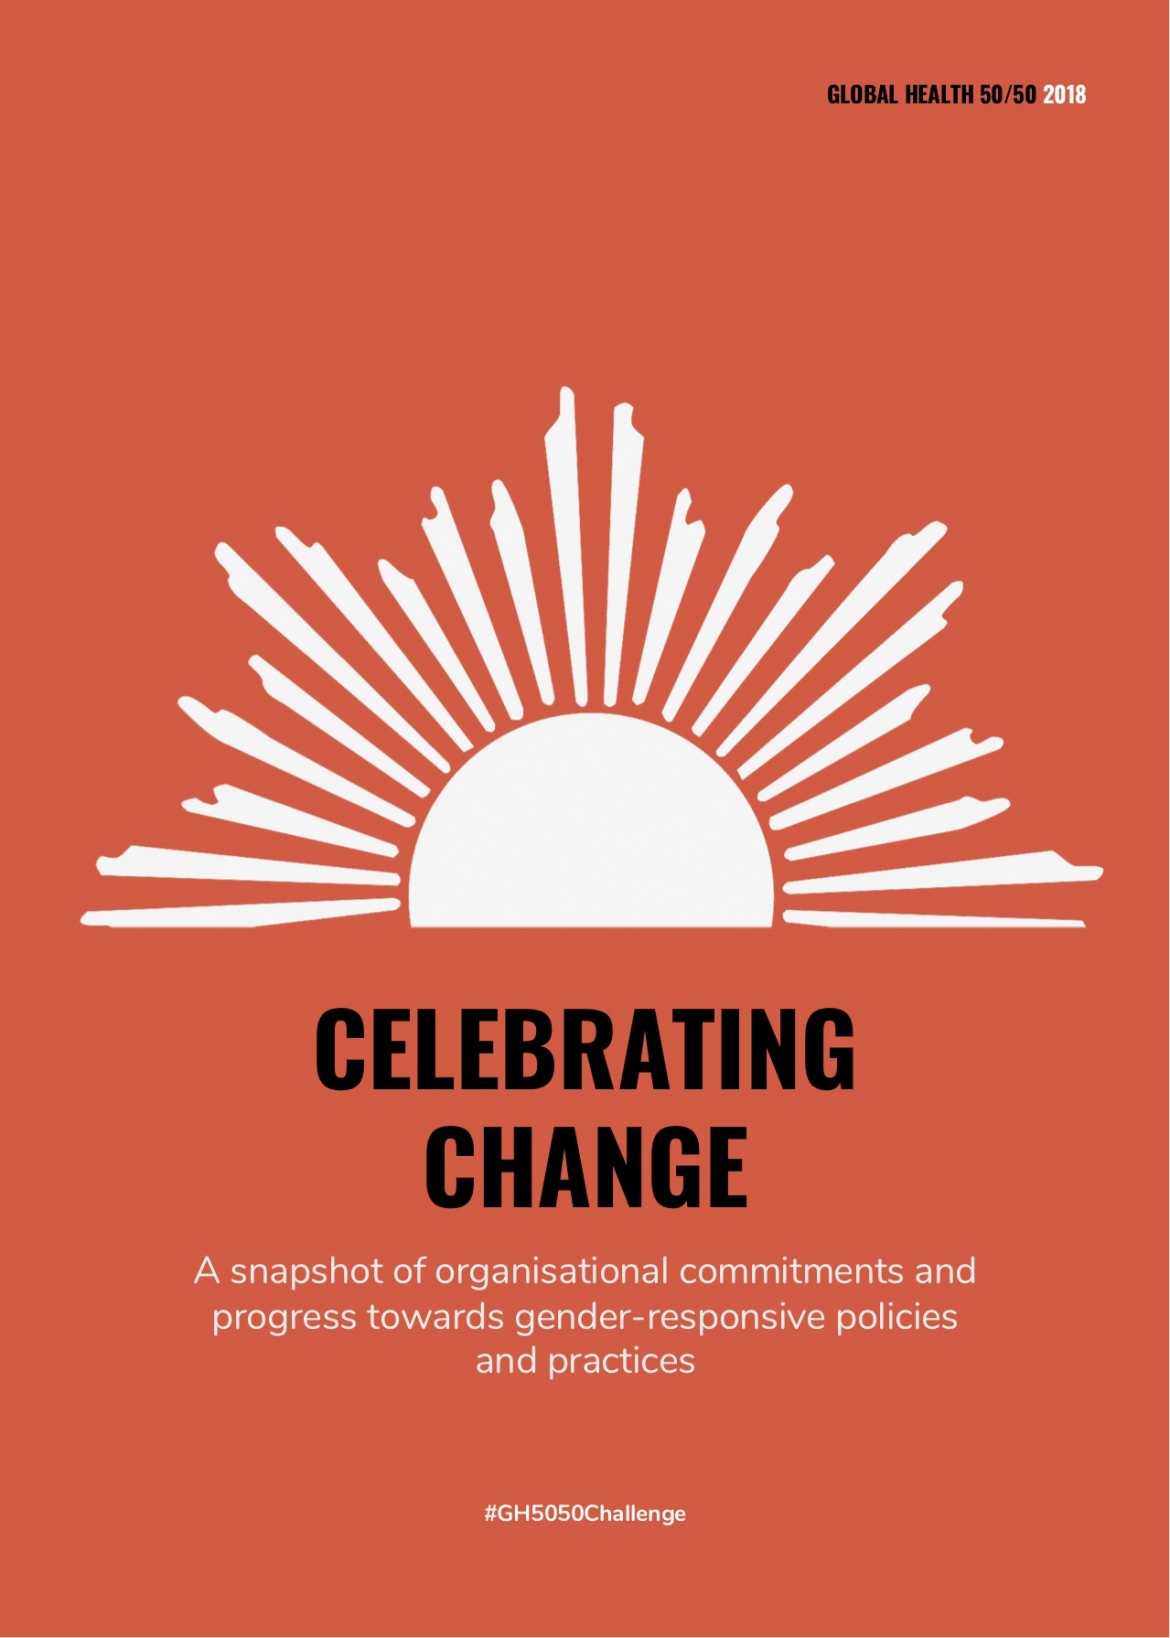 Celebrating Change: Organisational Commitments Towards Gender-Responsive Policies and Practices